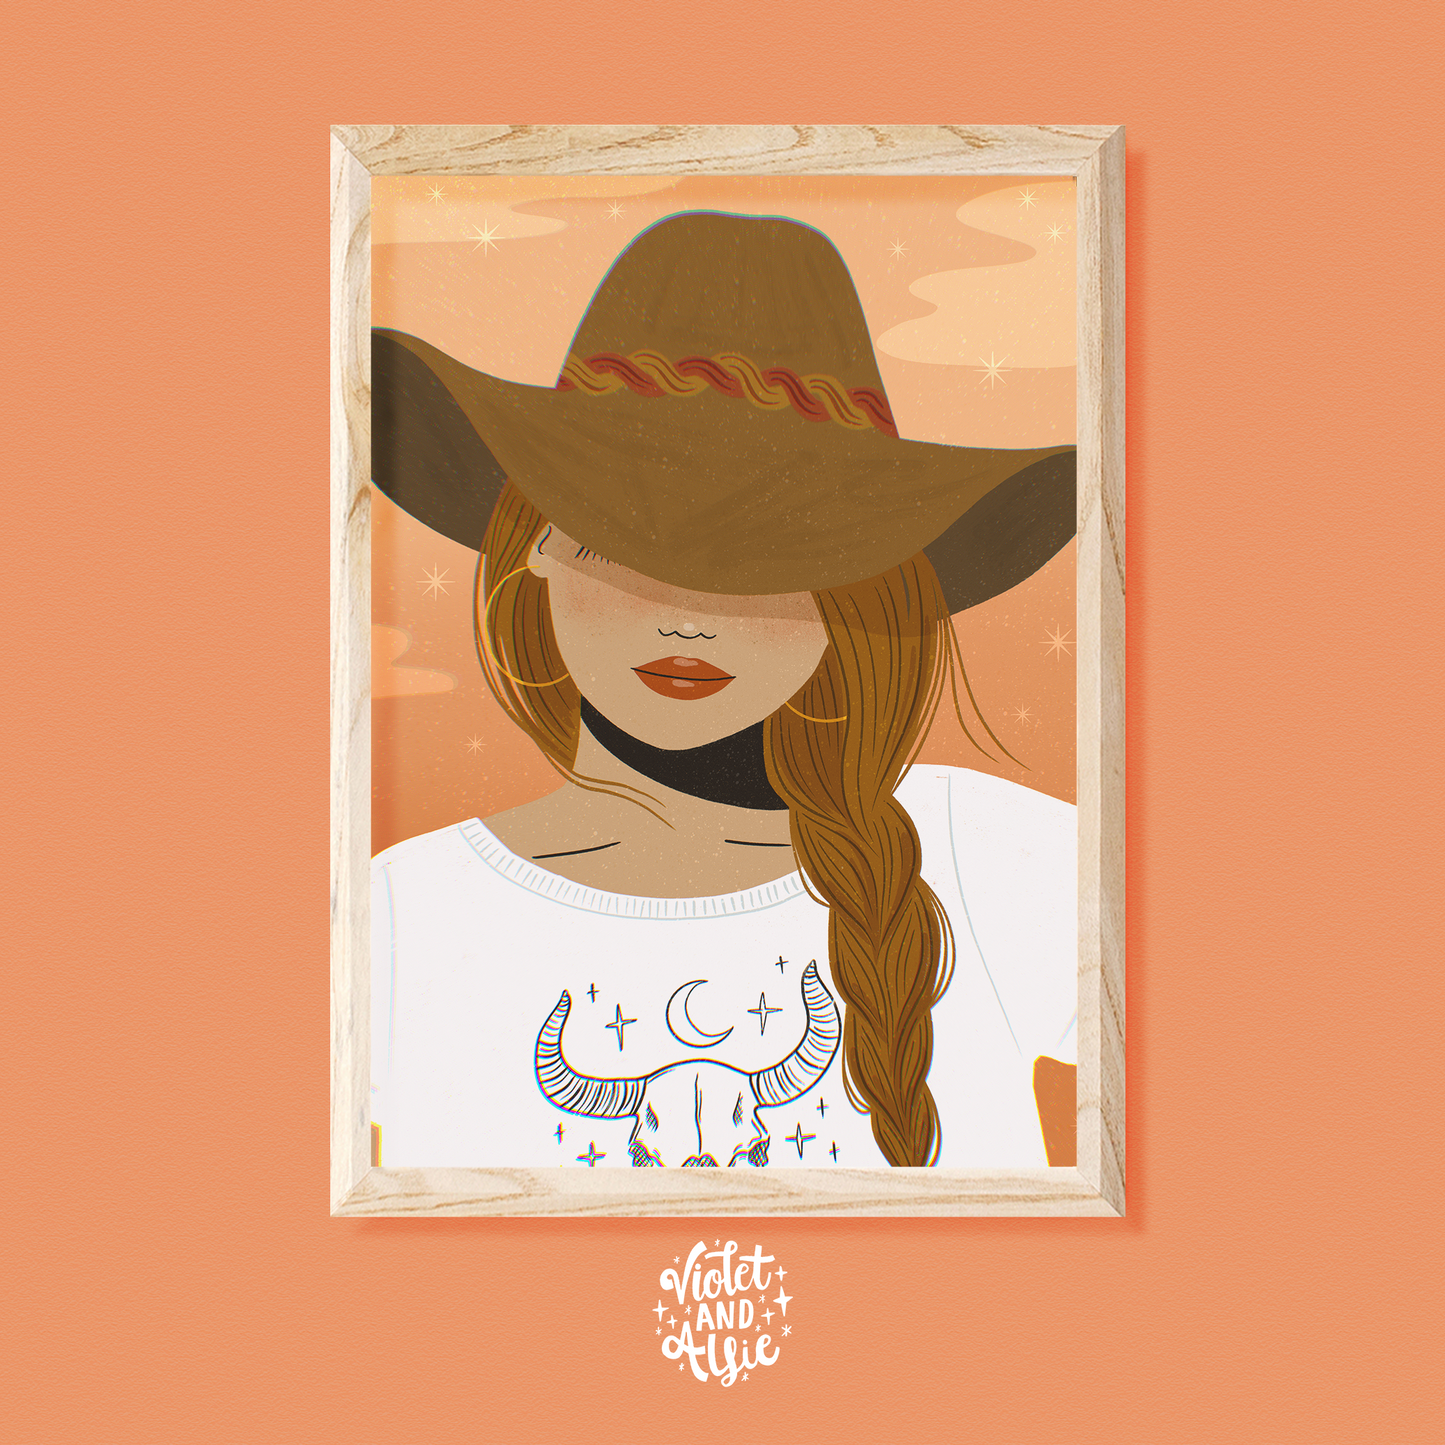 This dreamy cowgirl print makes a perfect addition to any boho western home decor.. country and western, cowboy aesthetic, modern cowgirl, boho cowgirl, boho western print, cowgirl illustration, wild west prints